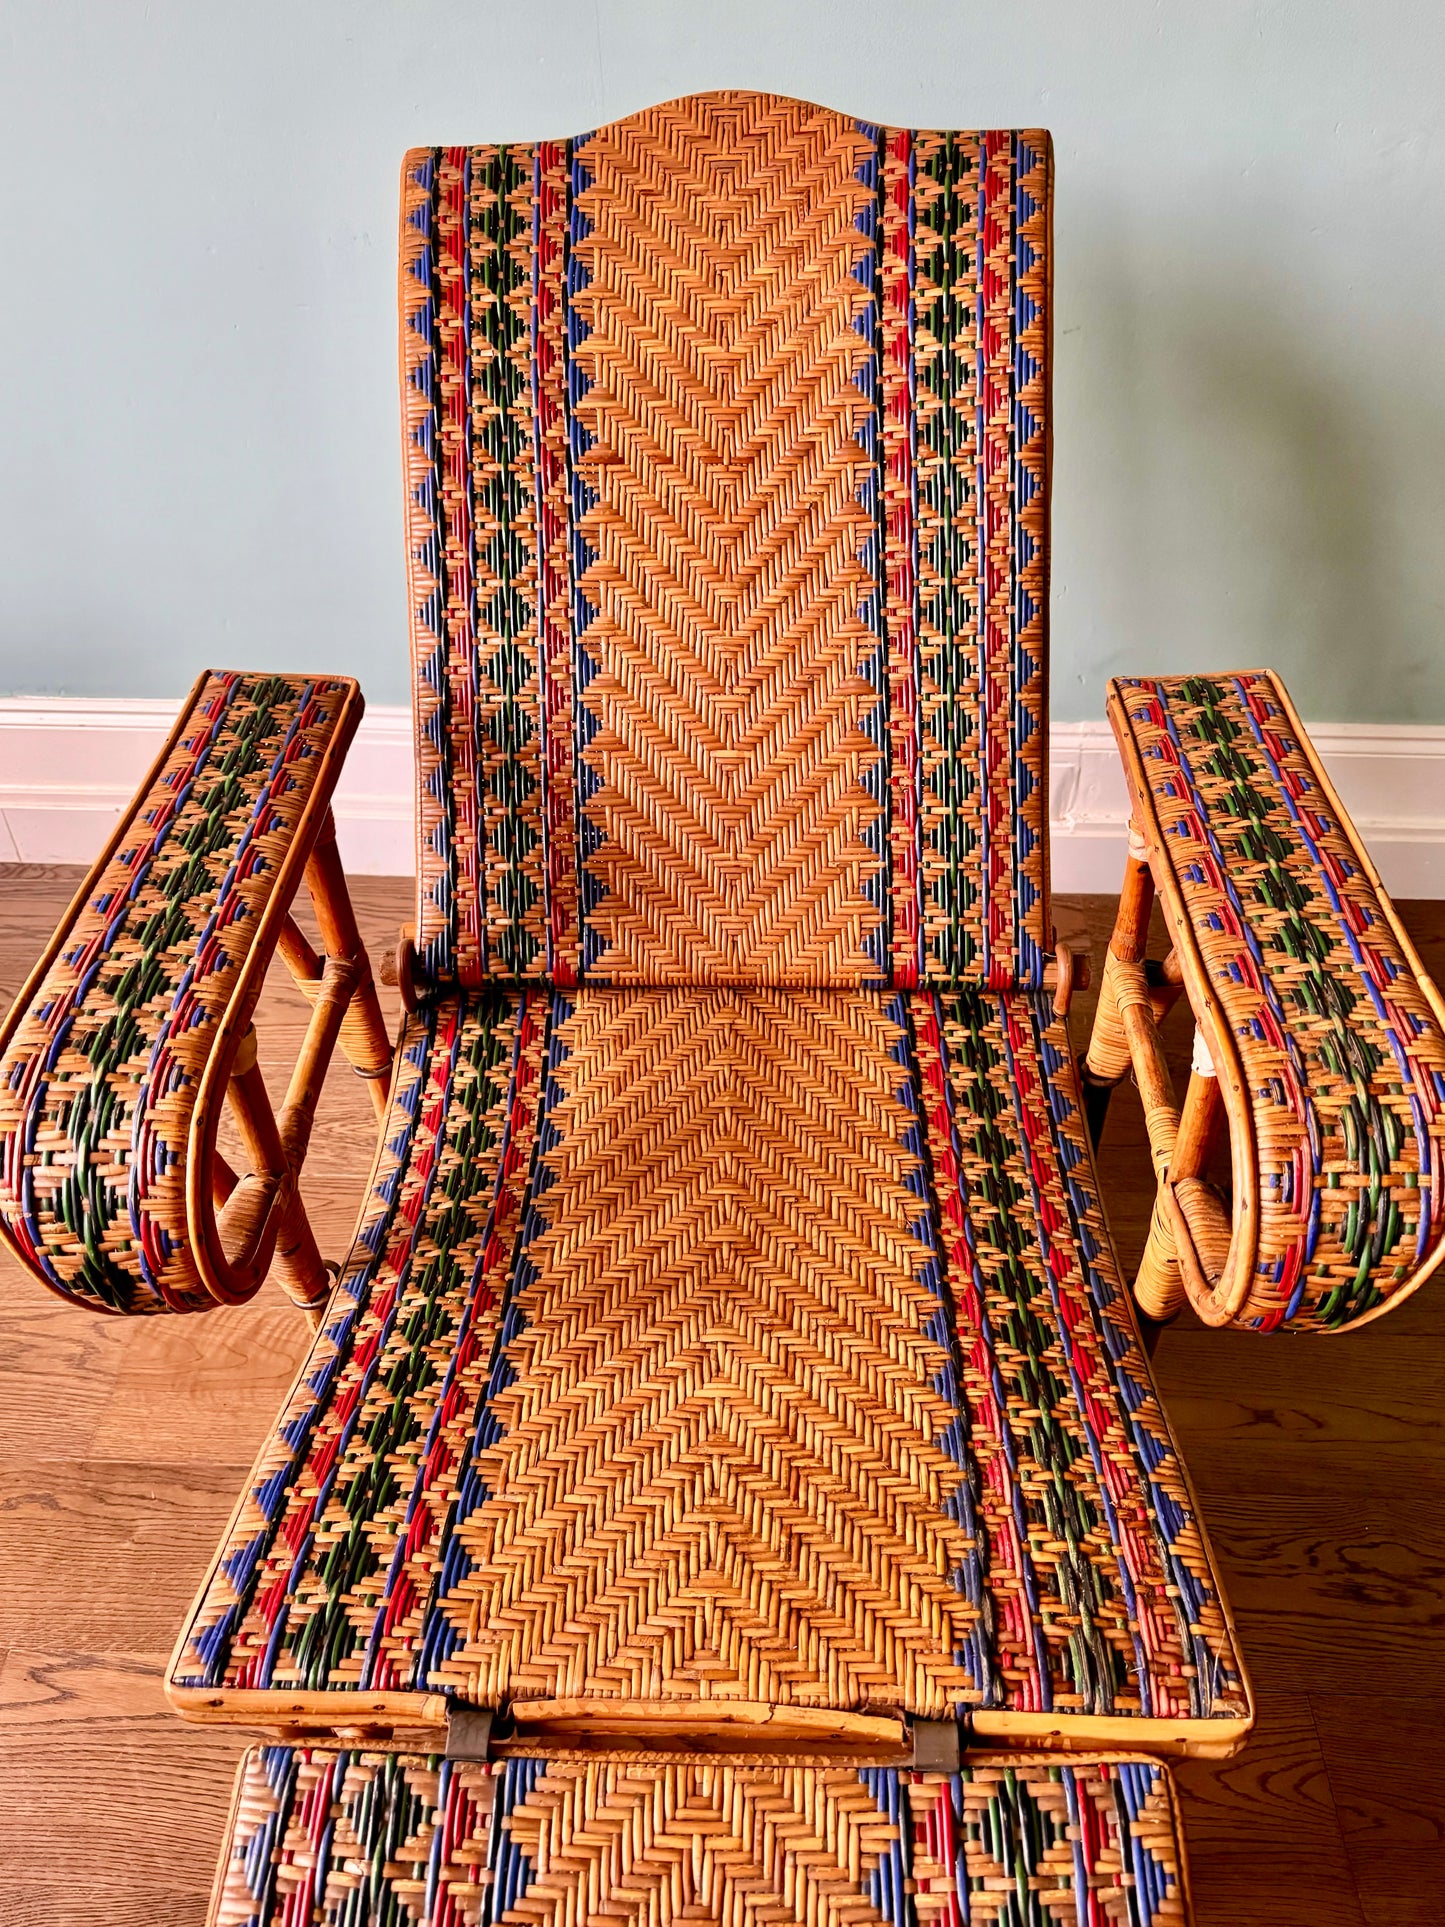 Early C20th French Bamboo & Rattan Chaise Longue